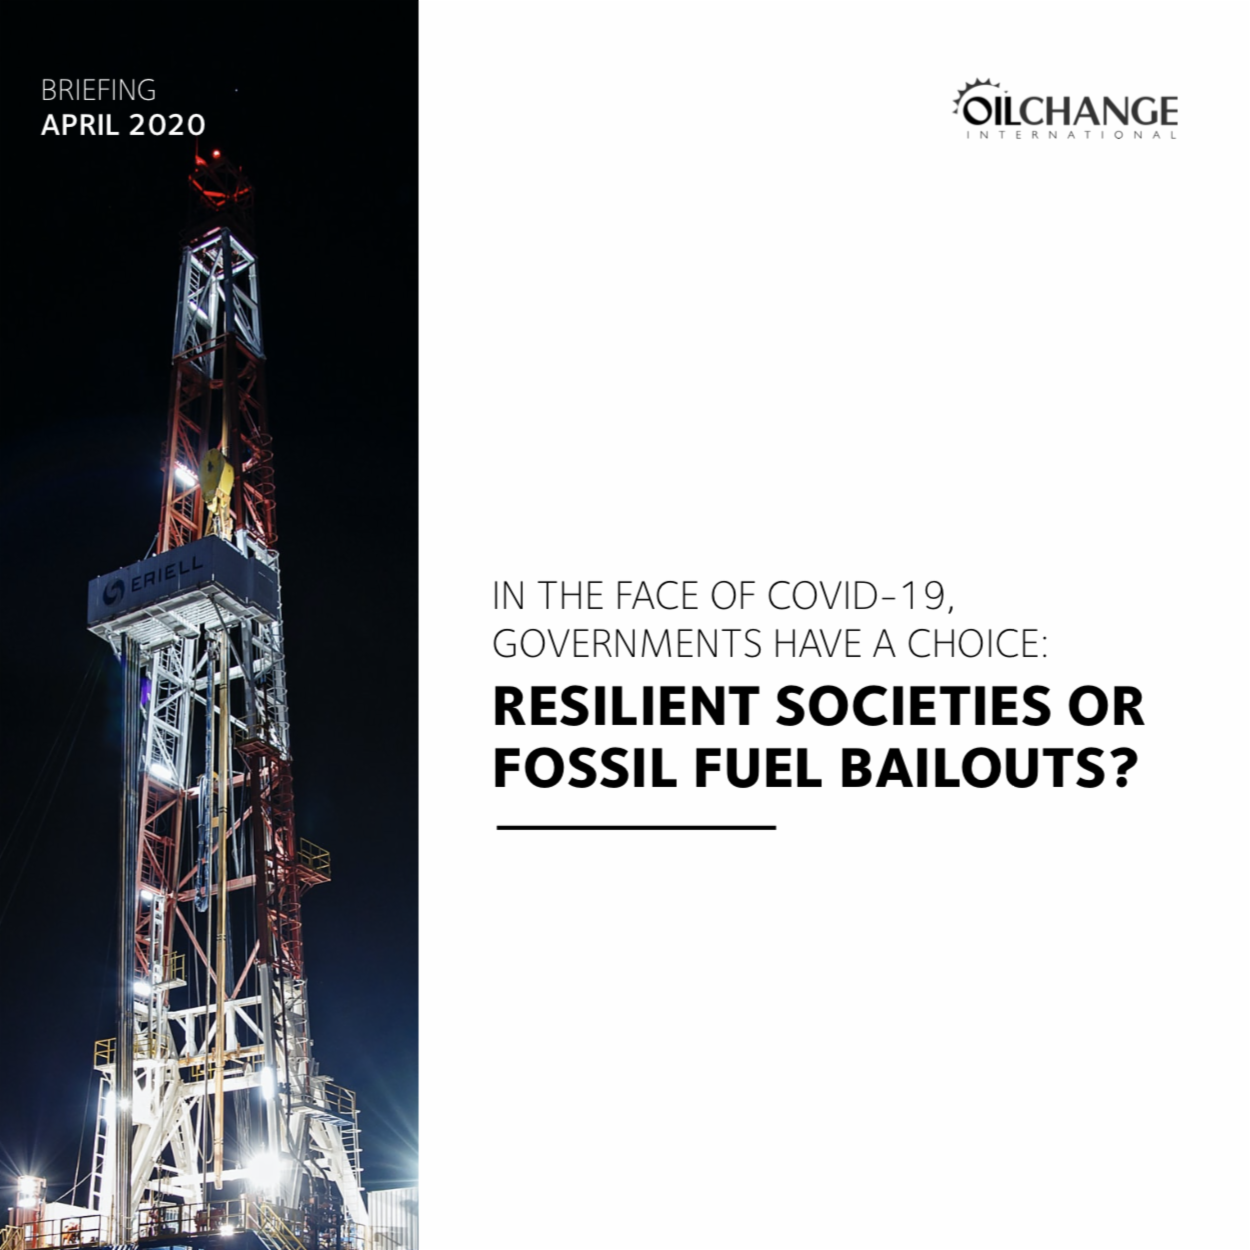 In the Face of COVID-19, Governments Have a Choice: Resilient Societies or Fossil Fuel Bailouts?